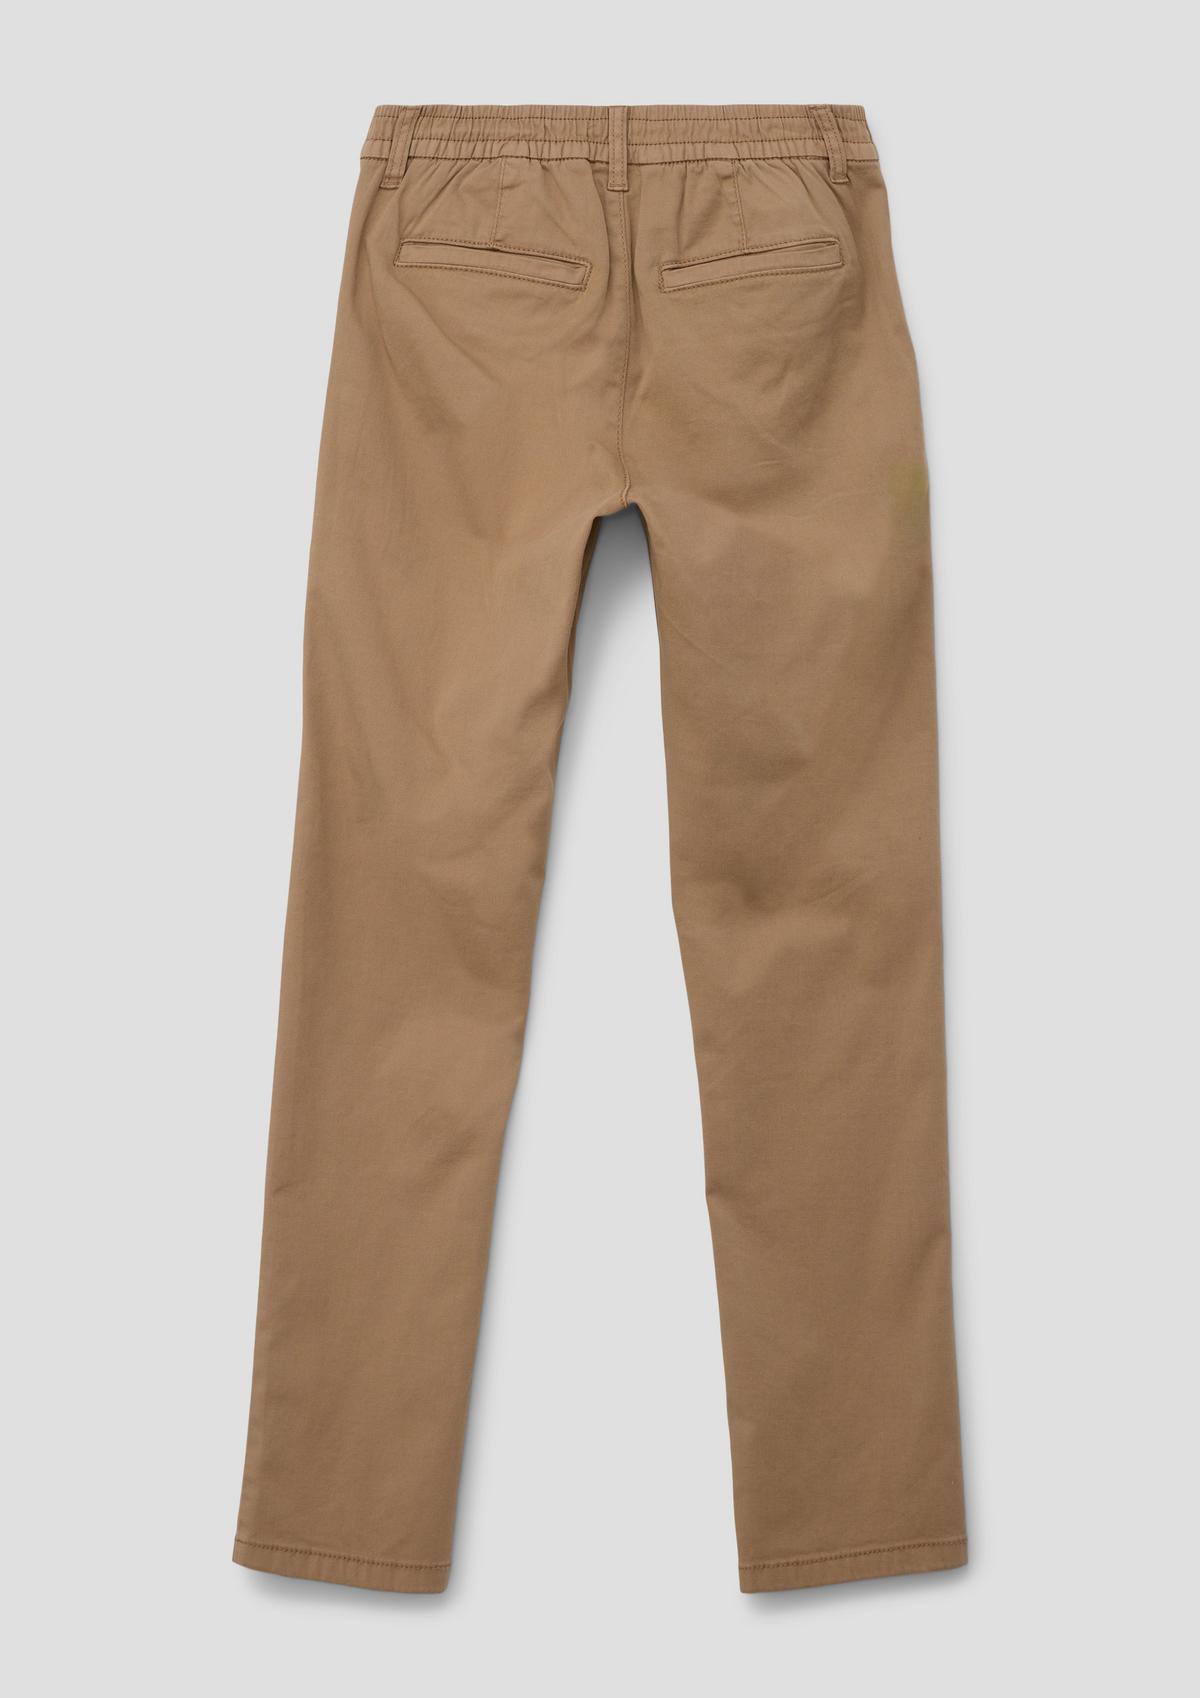 s.Oliver Chinos: trousers with a dobby texture